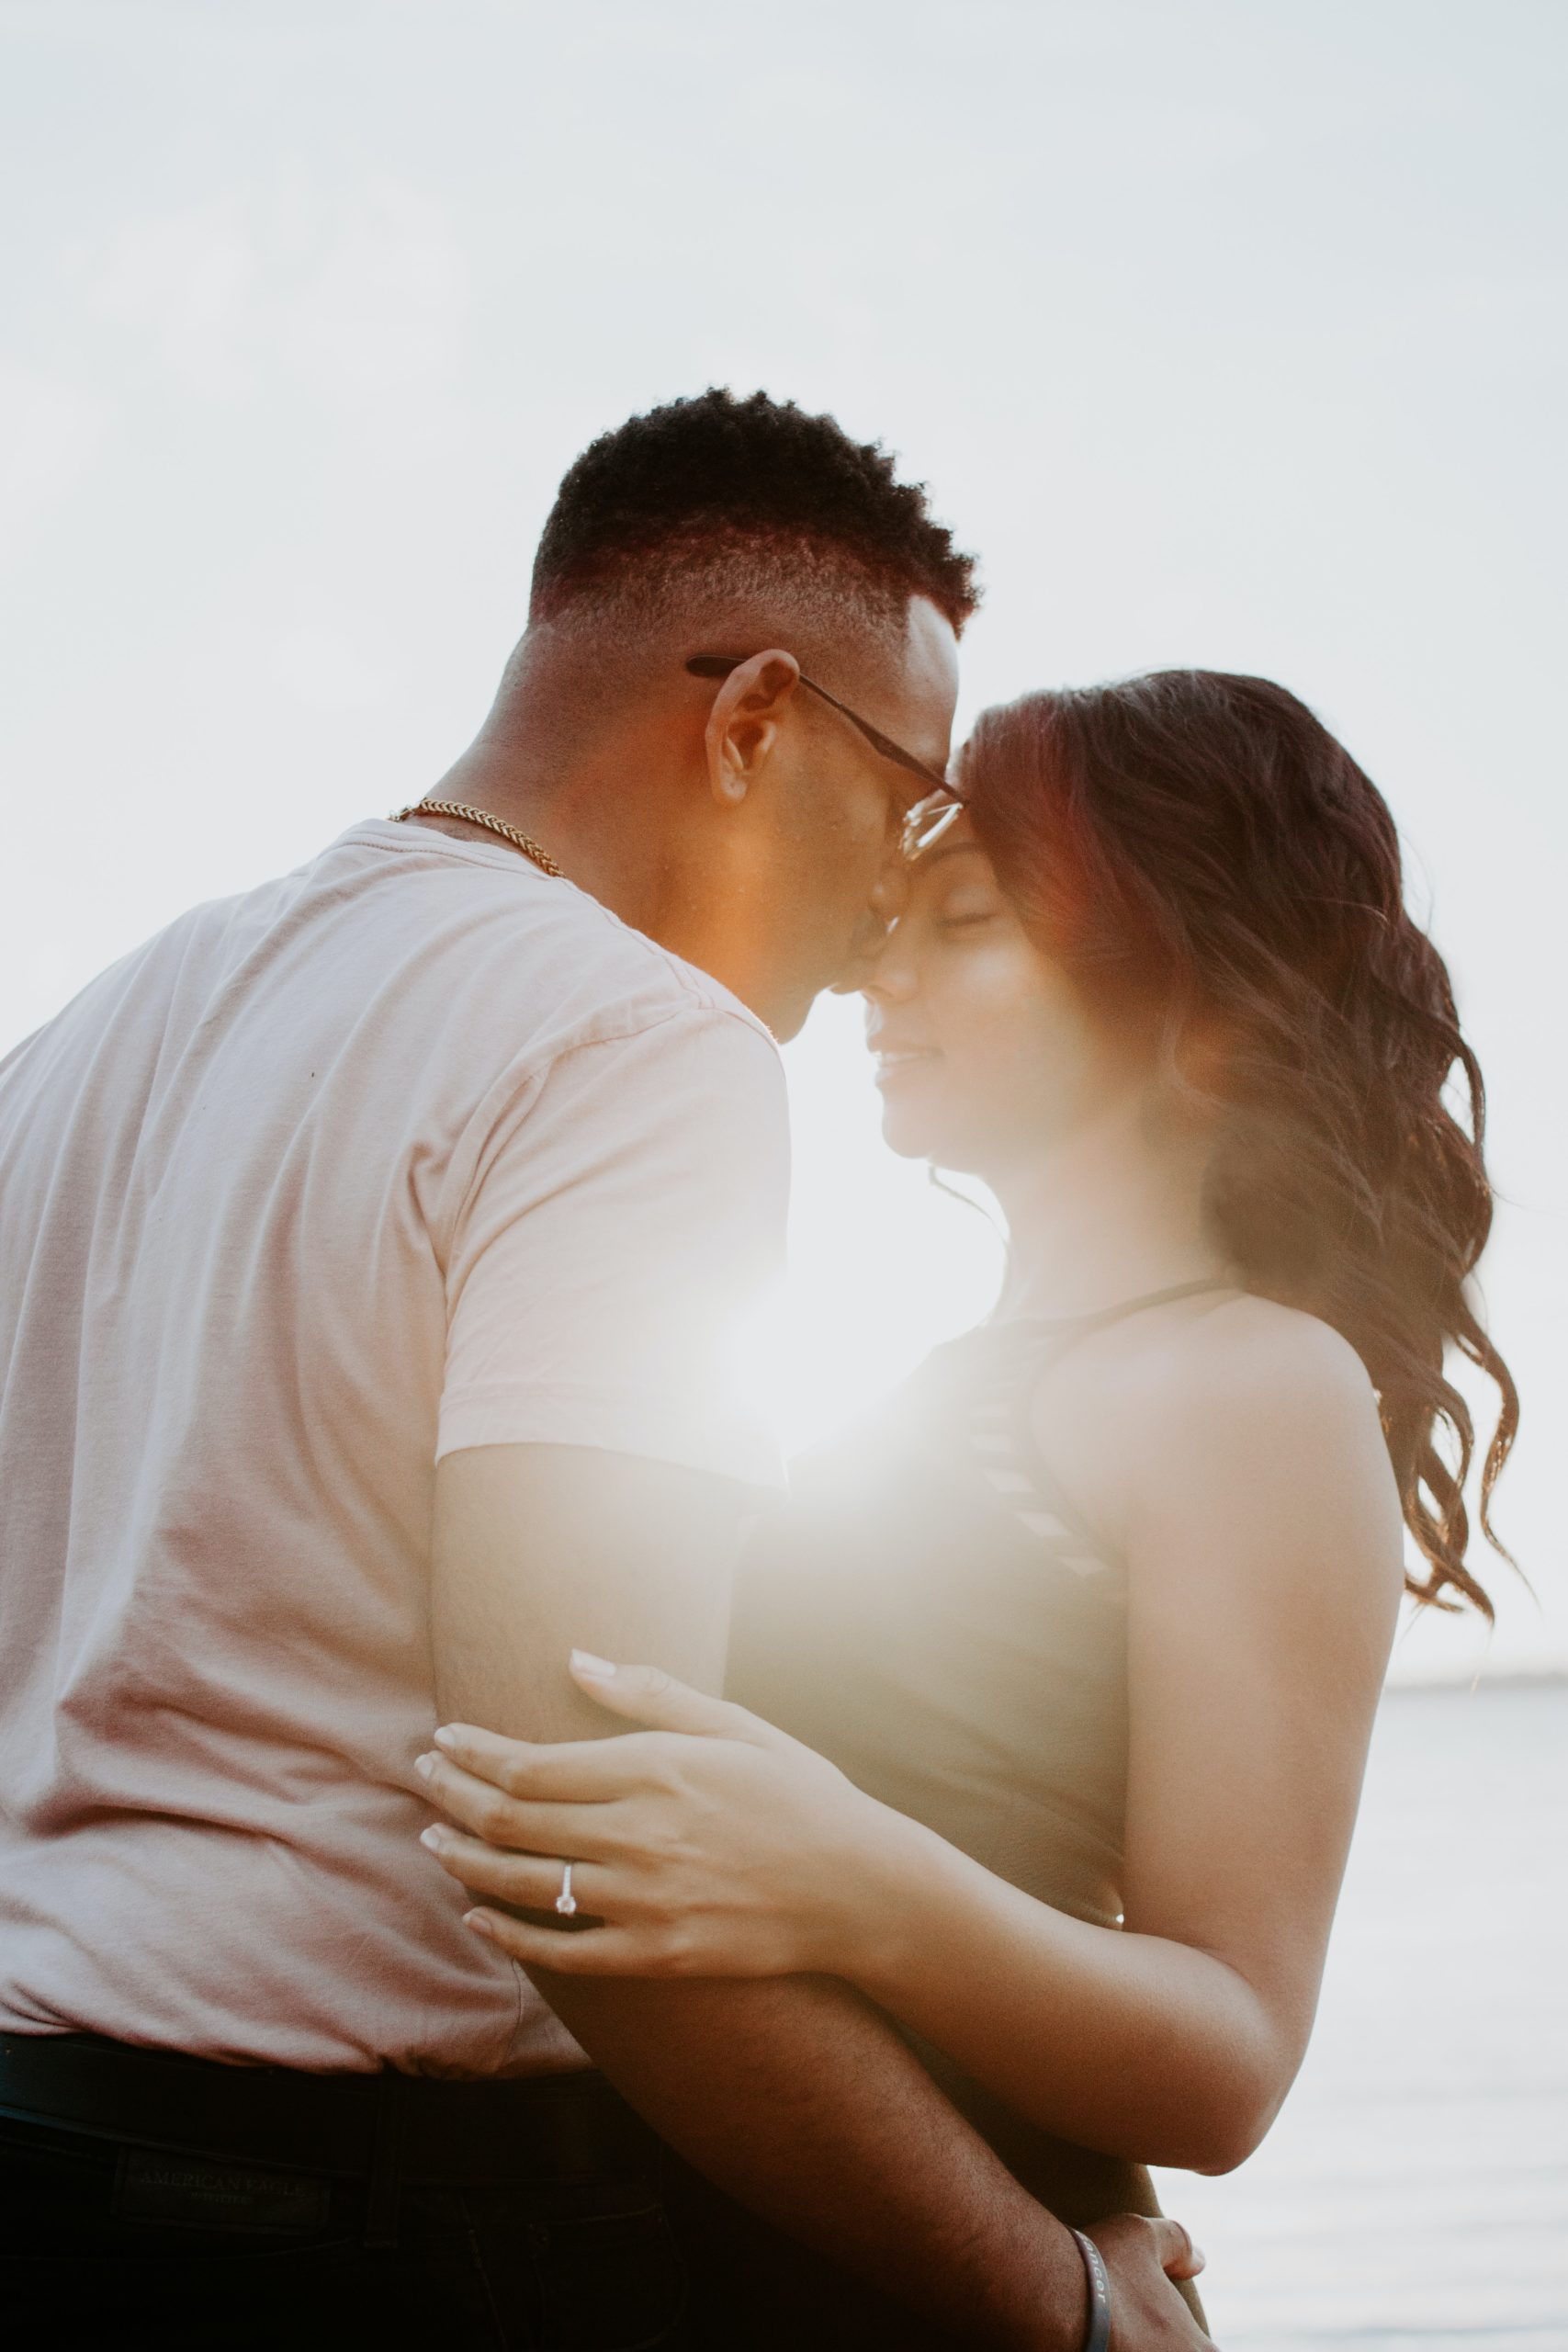 Photo by Jasmine Carter: https://www.pexels.com/photo/man-wearing-white-shirt-kissing-woman-in-her-nose-888894/